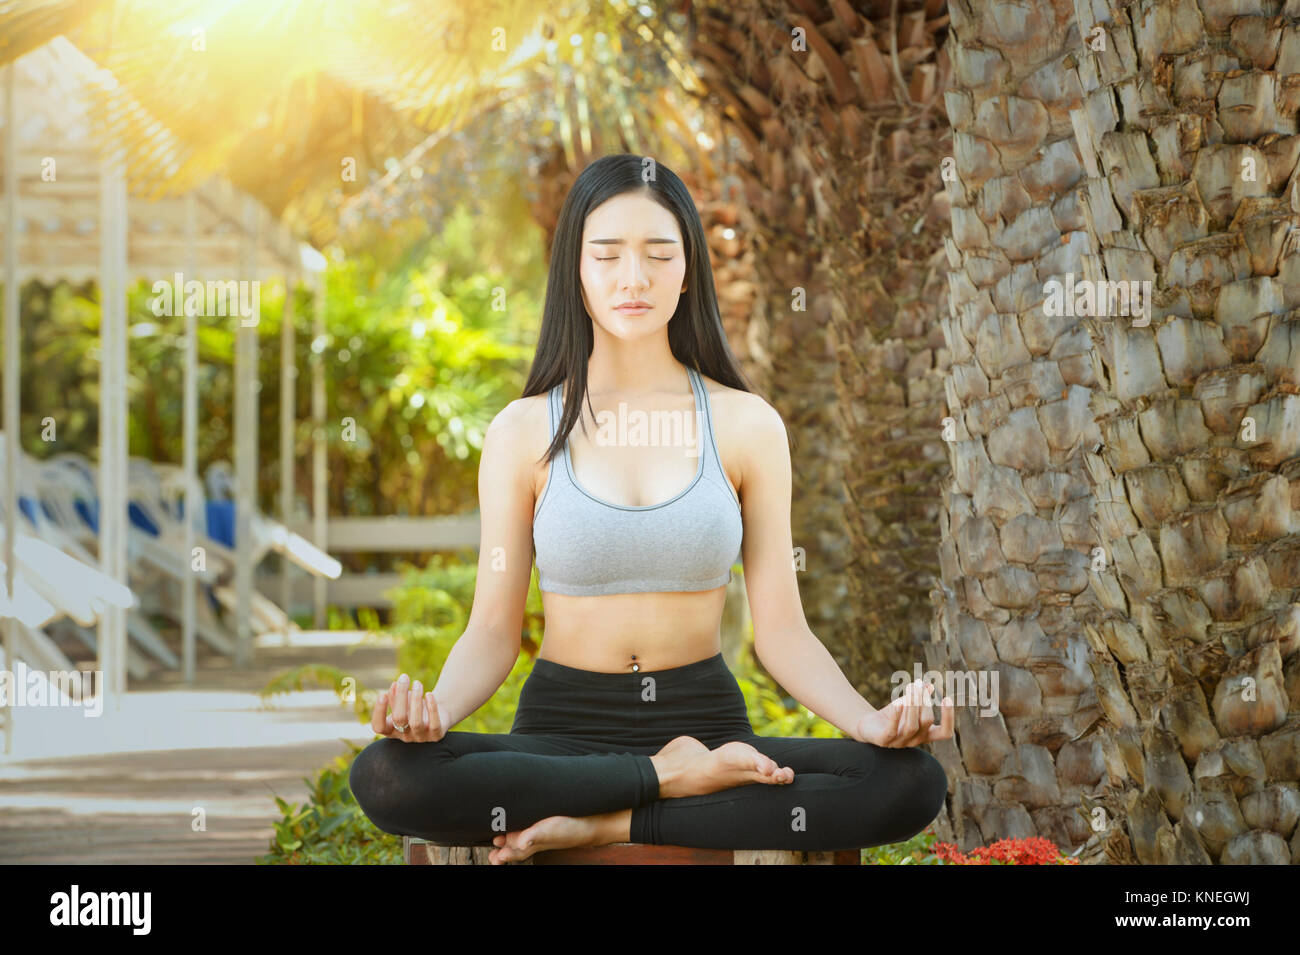 Woman sitting in a park doing yoga Stock Photo